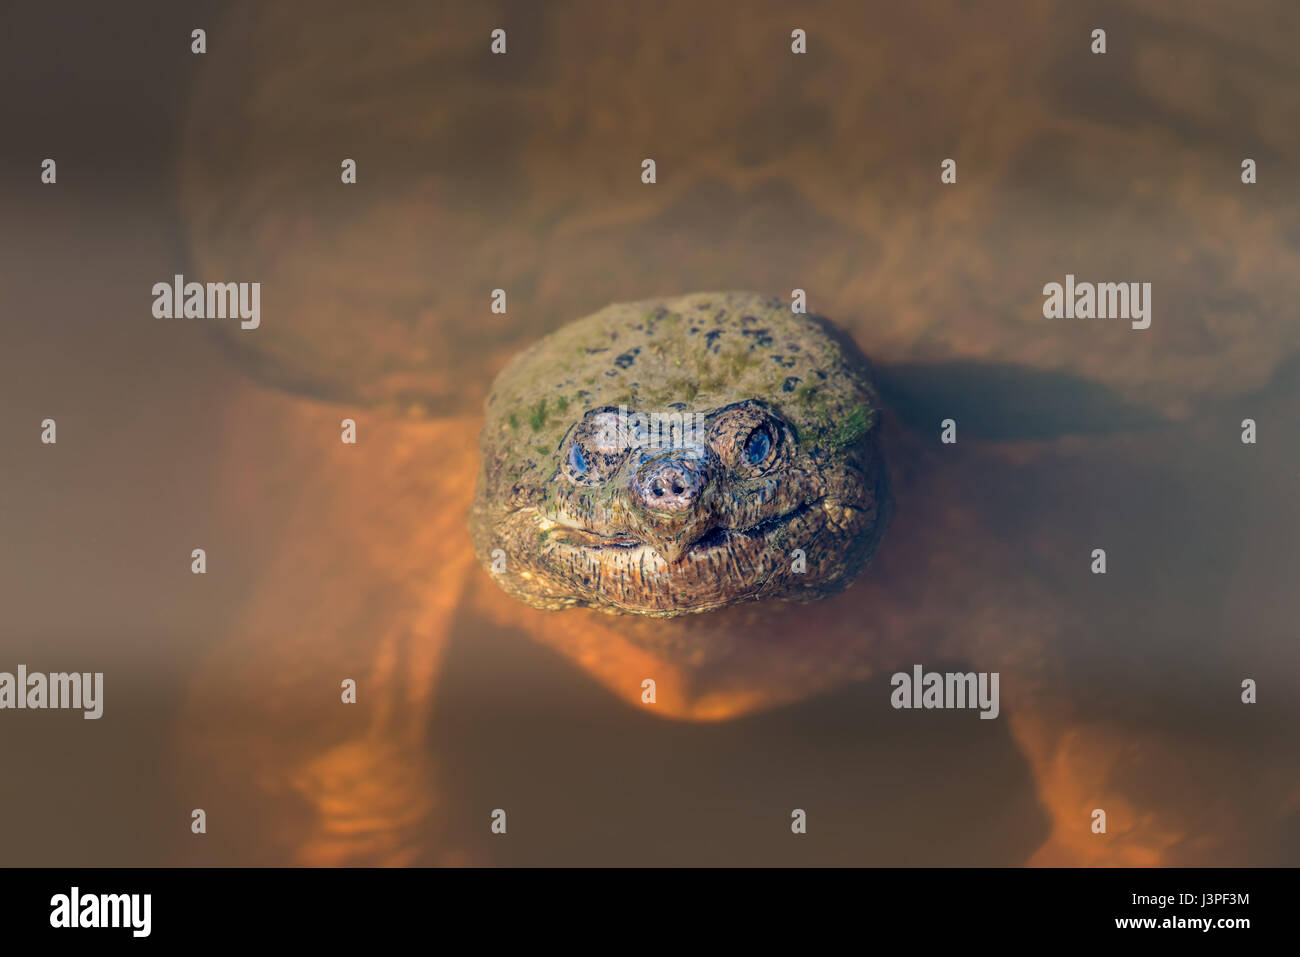 Close-up of the face of a large Snapping Turtle sticking its head out of the water in a Chesapeake Bay pond Stock Photo